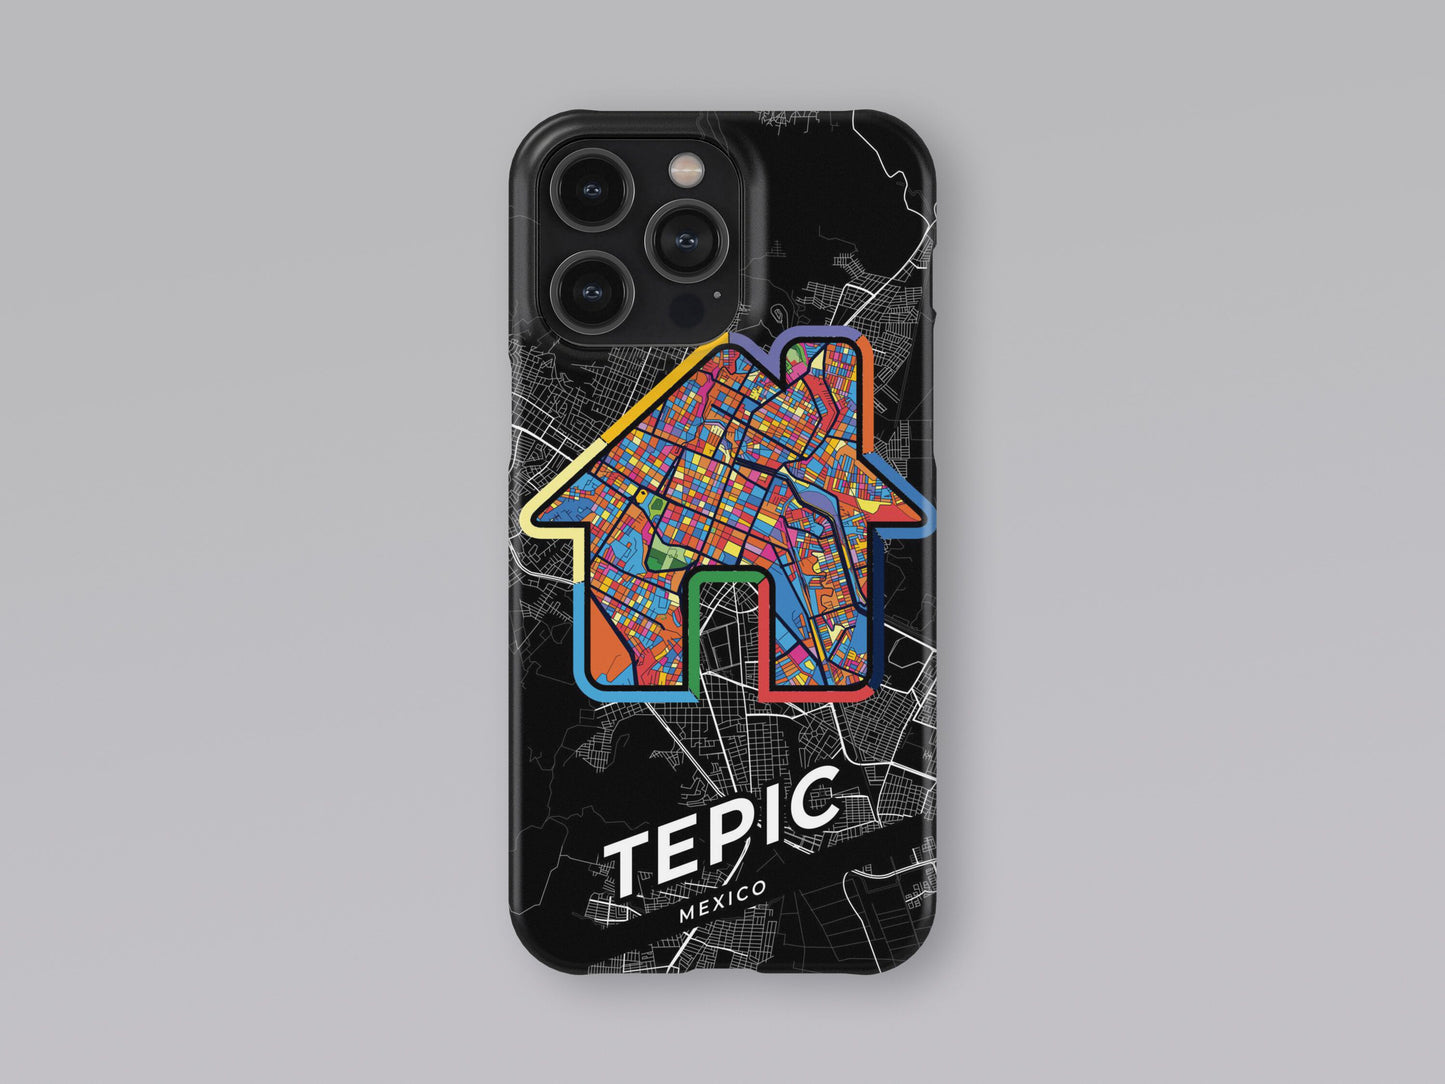 Tepic Mexico slim phone case with colorful icon 3